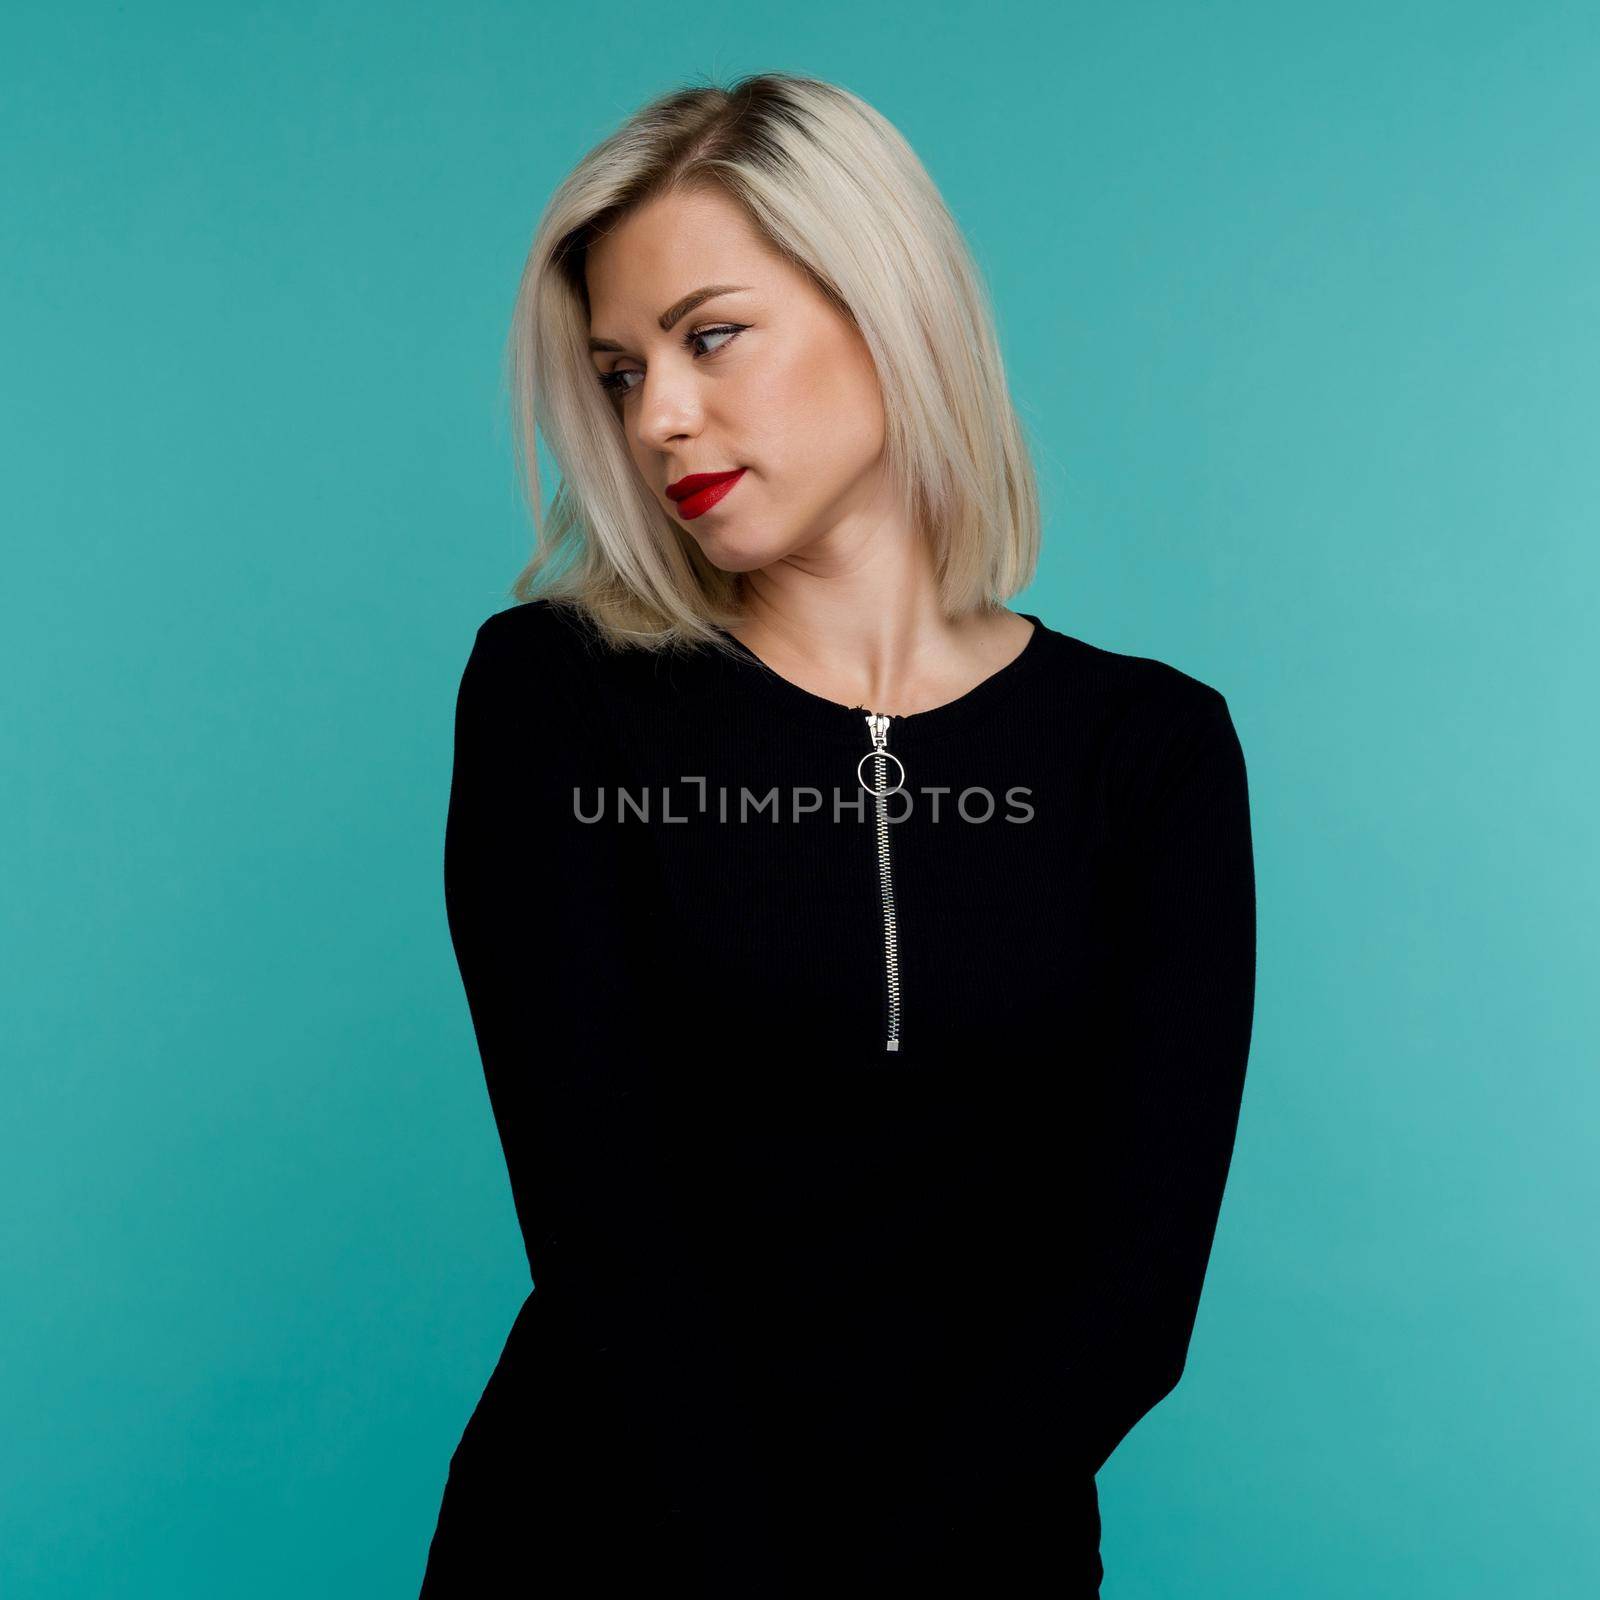 Portrait of an attractive blonde woman in a black dress. Lovely girl posing on a blue background.